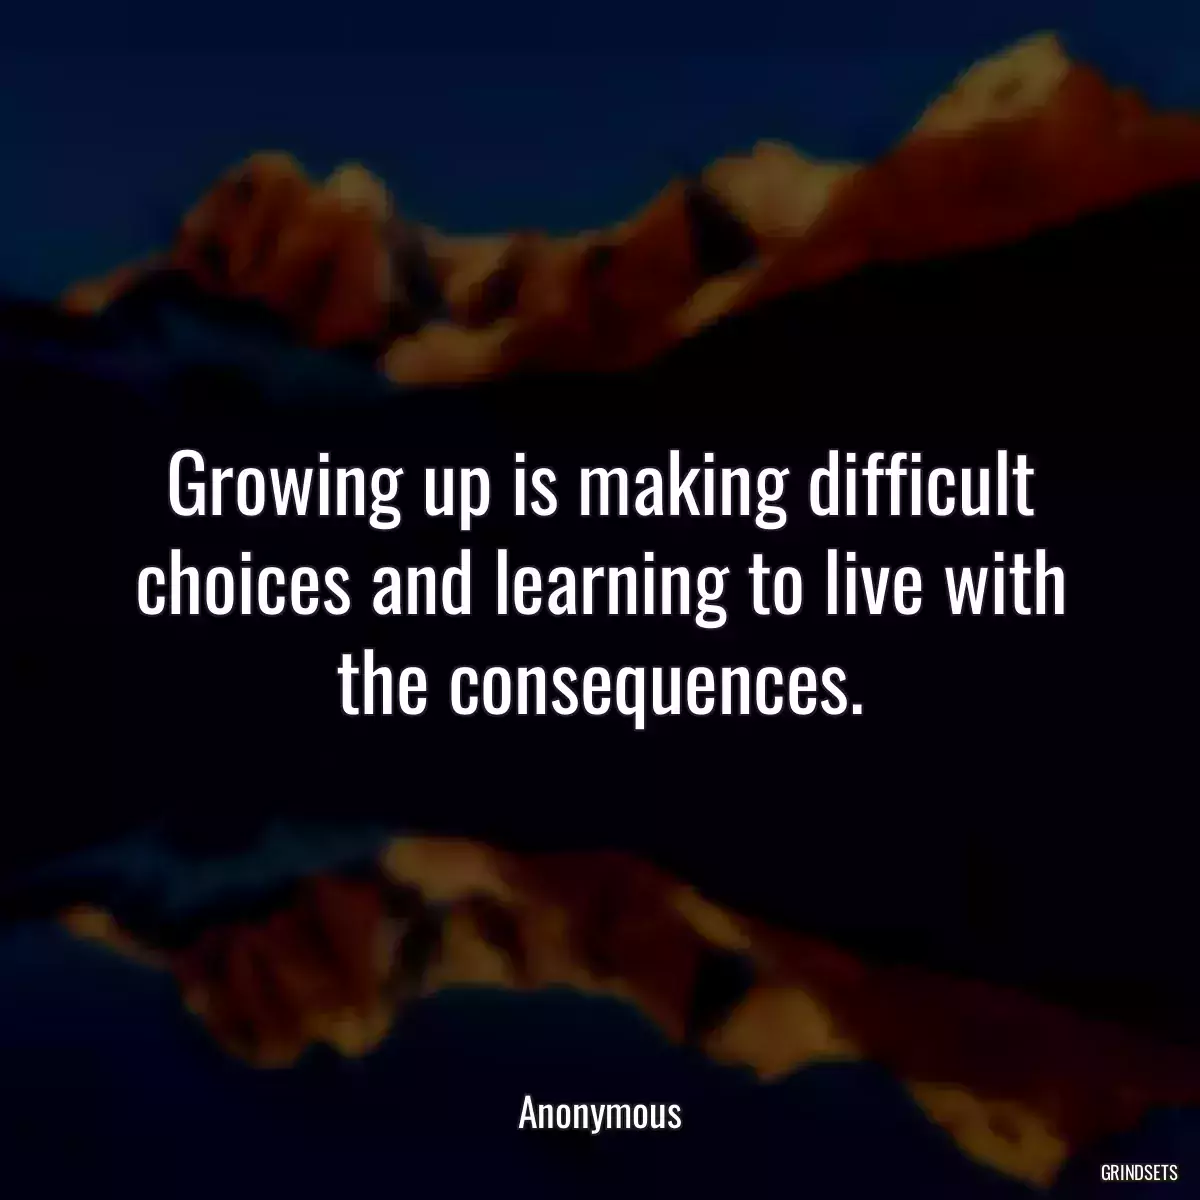 Growing up is making difficult choices and learning to live with the consequences.